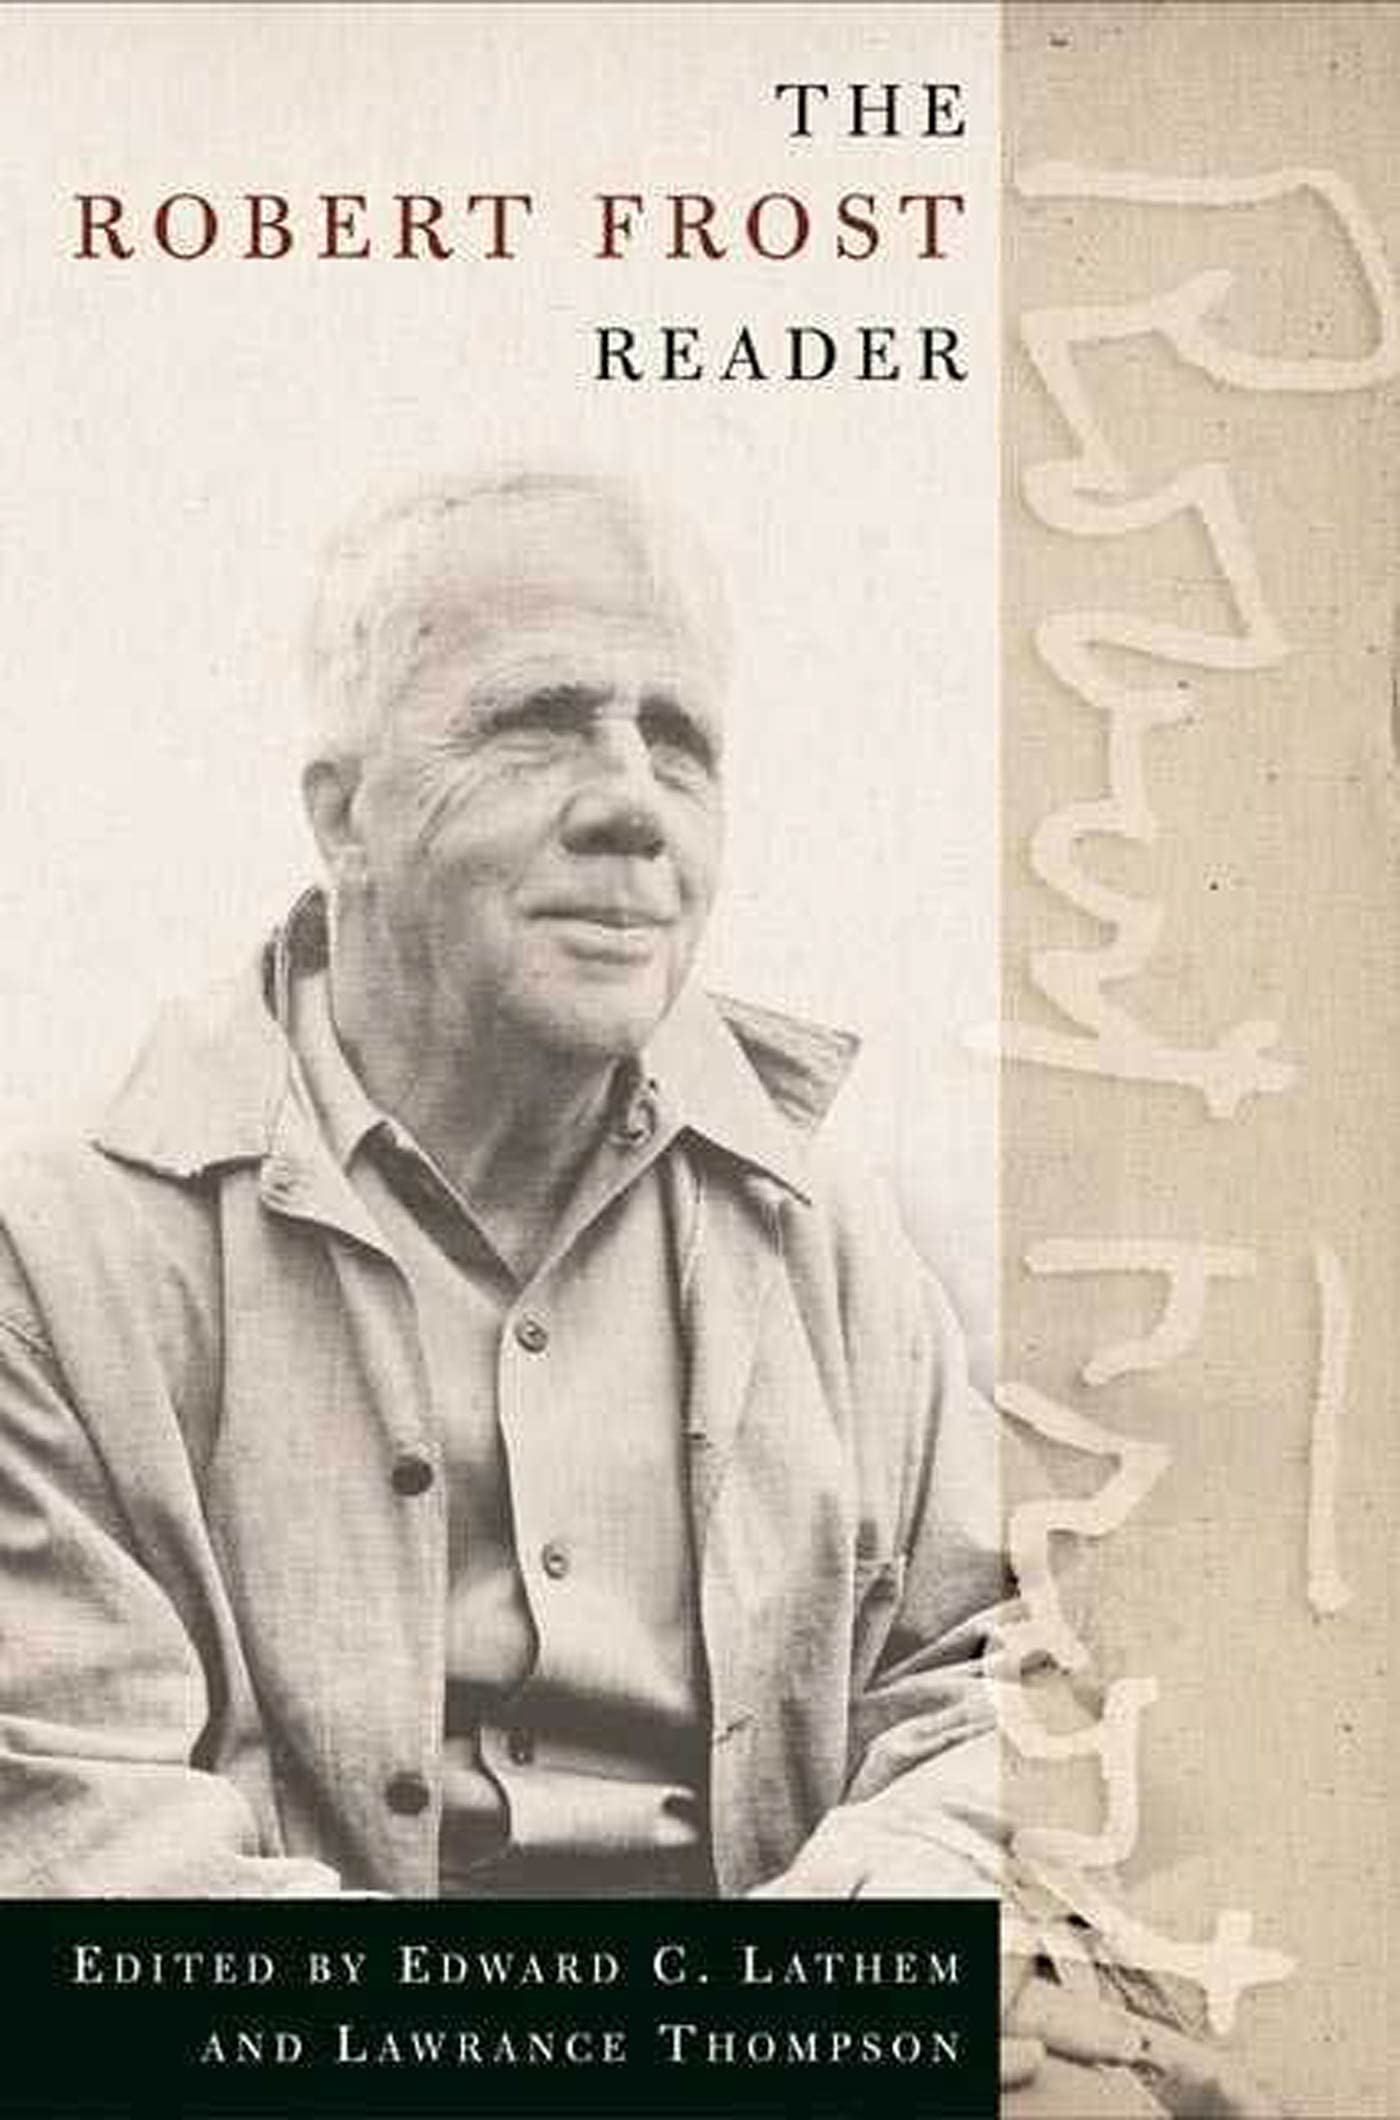 The Robert Frost Reader Poetry and Prose